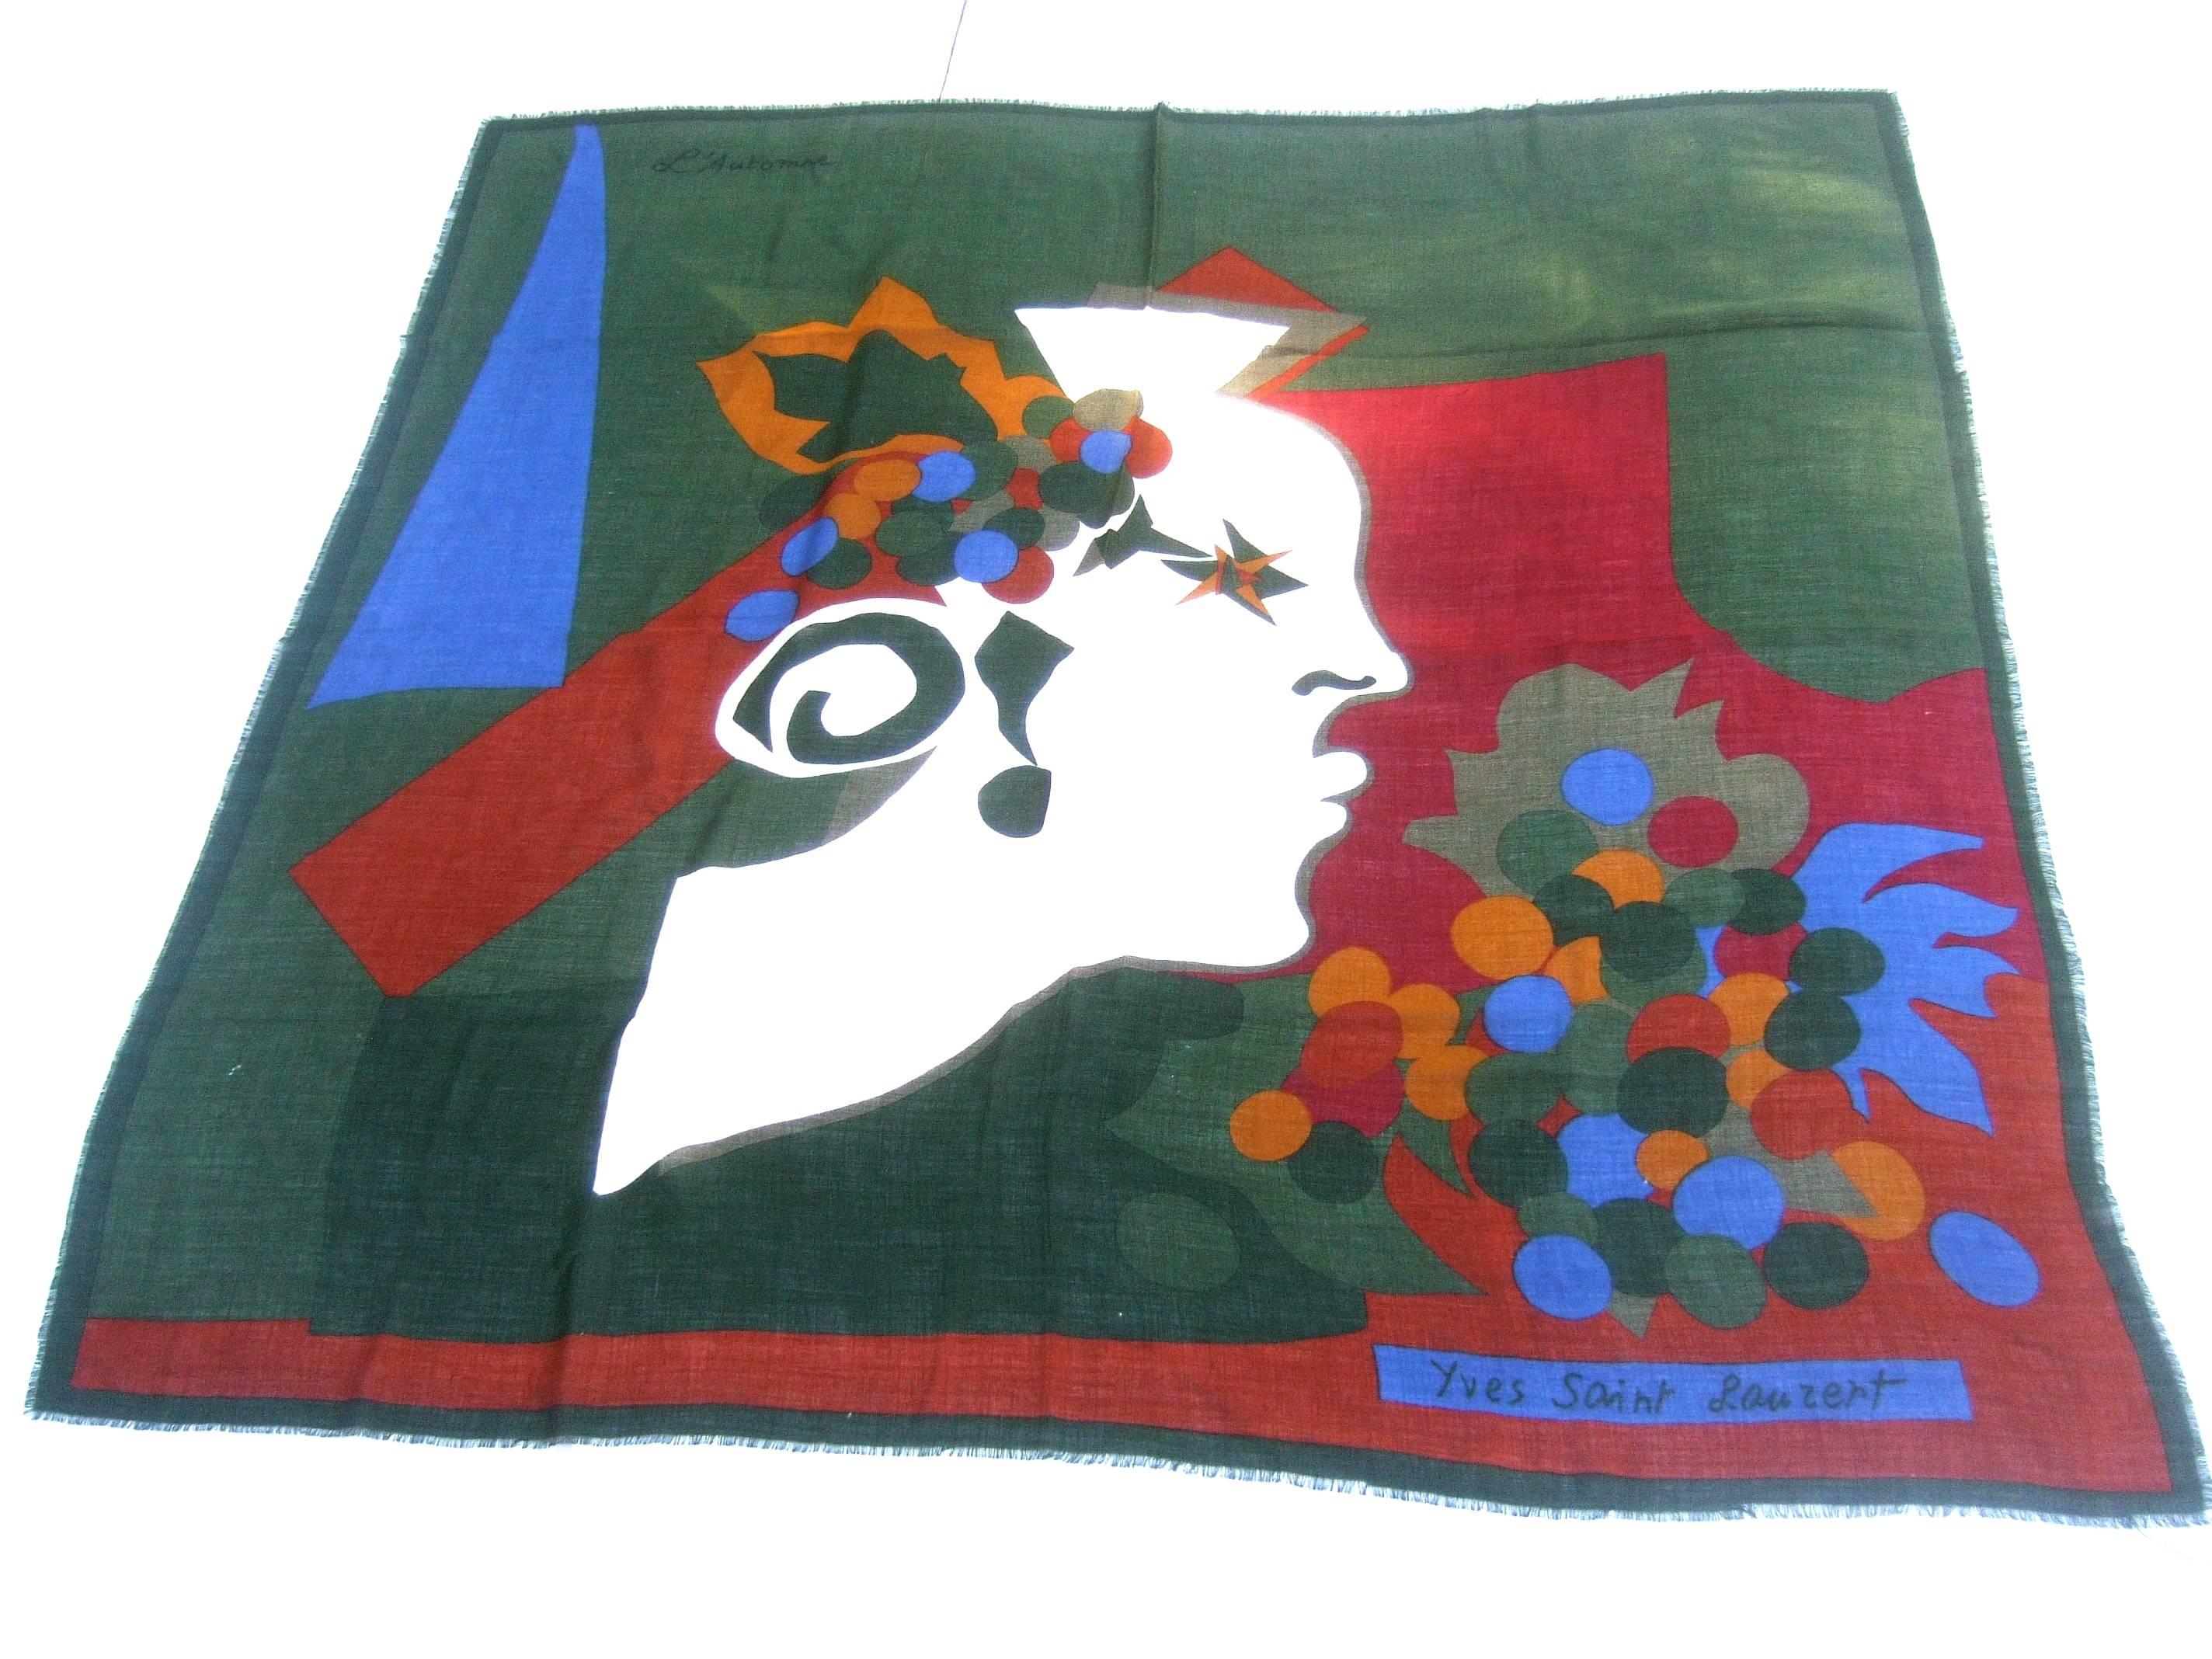 Yves Saint Laurent Stunning Italian wool shawl scarf c 1970s
The beautiful huge shawl- scarf is illustrated 
with a female figure surrounded by autumn 
color block designs 

The amazing sheer wool shawl - scarf is entitled 
L'Automne. The